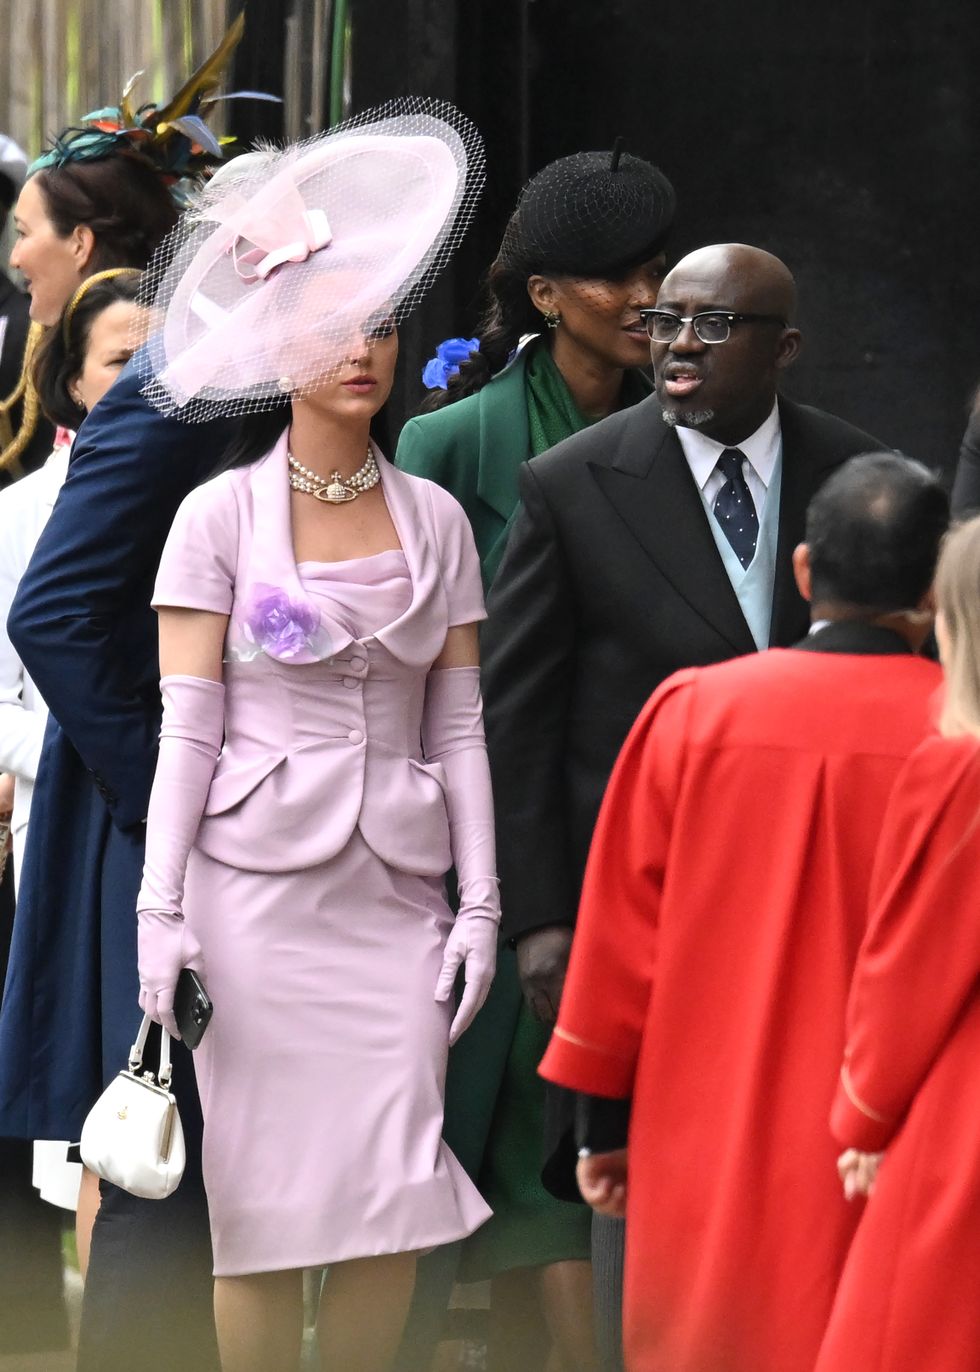 Katy Perry arrives at the coronation in pink suit